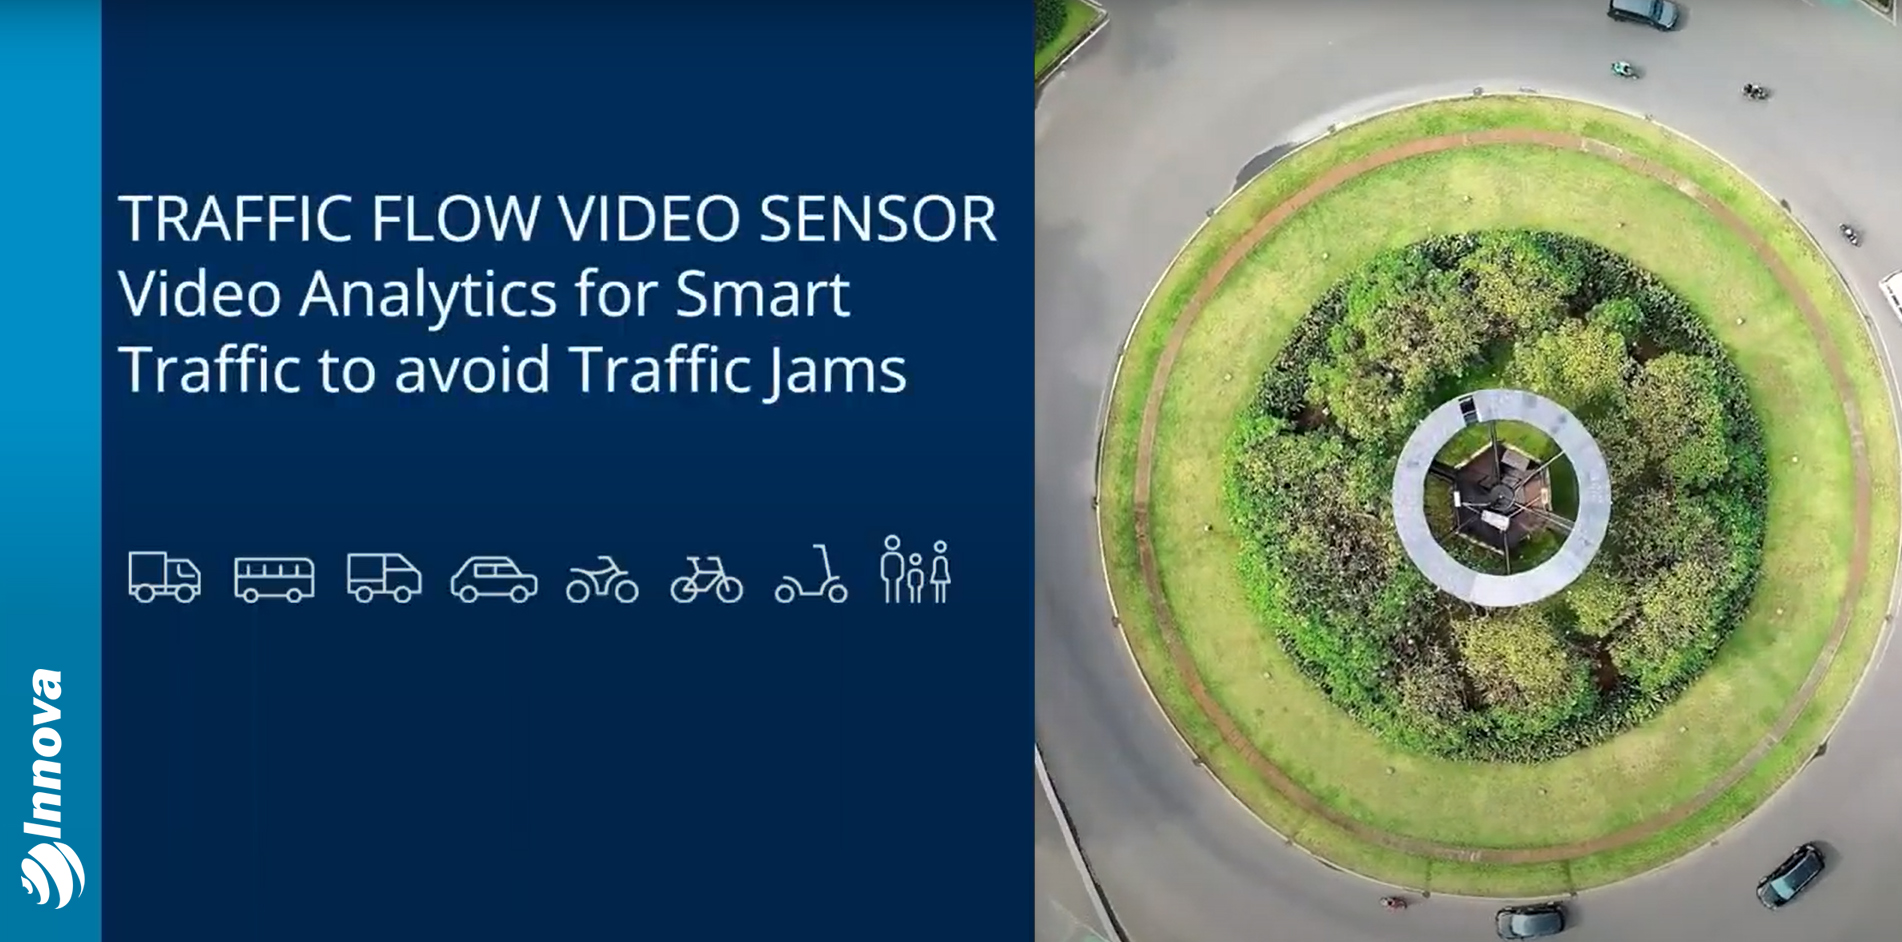 Smart roundabouts: The camera as a sensor for traffic management